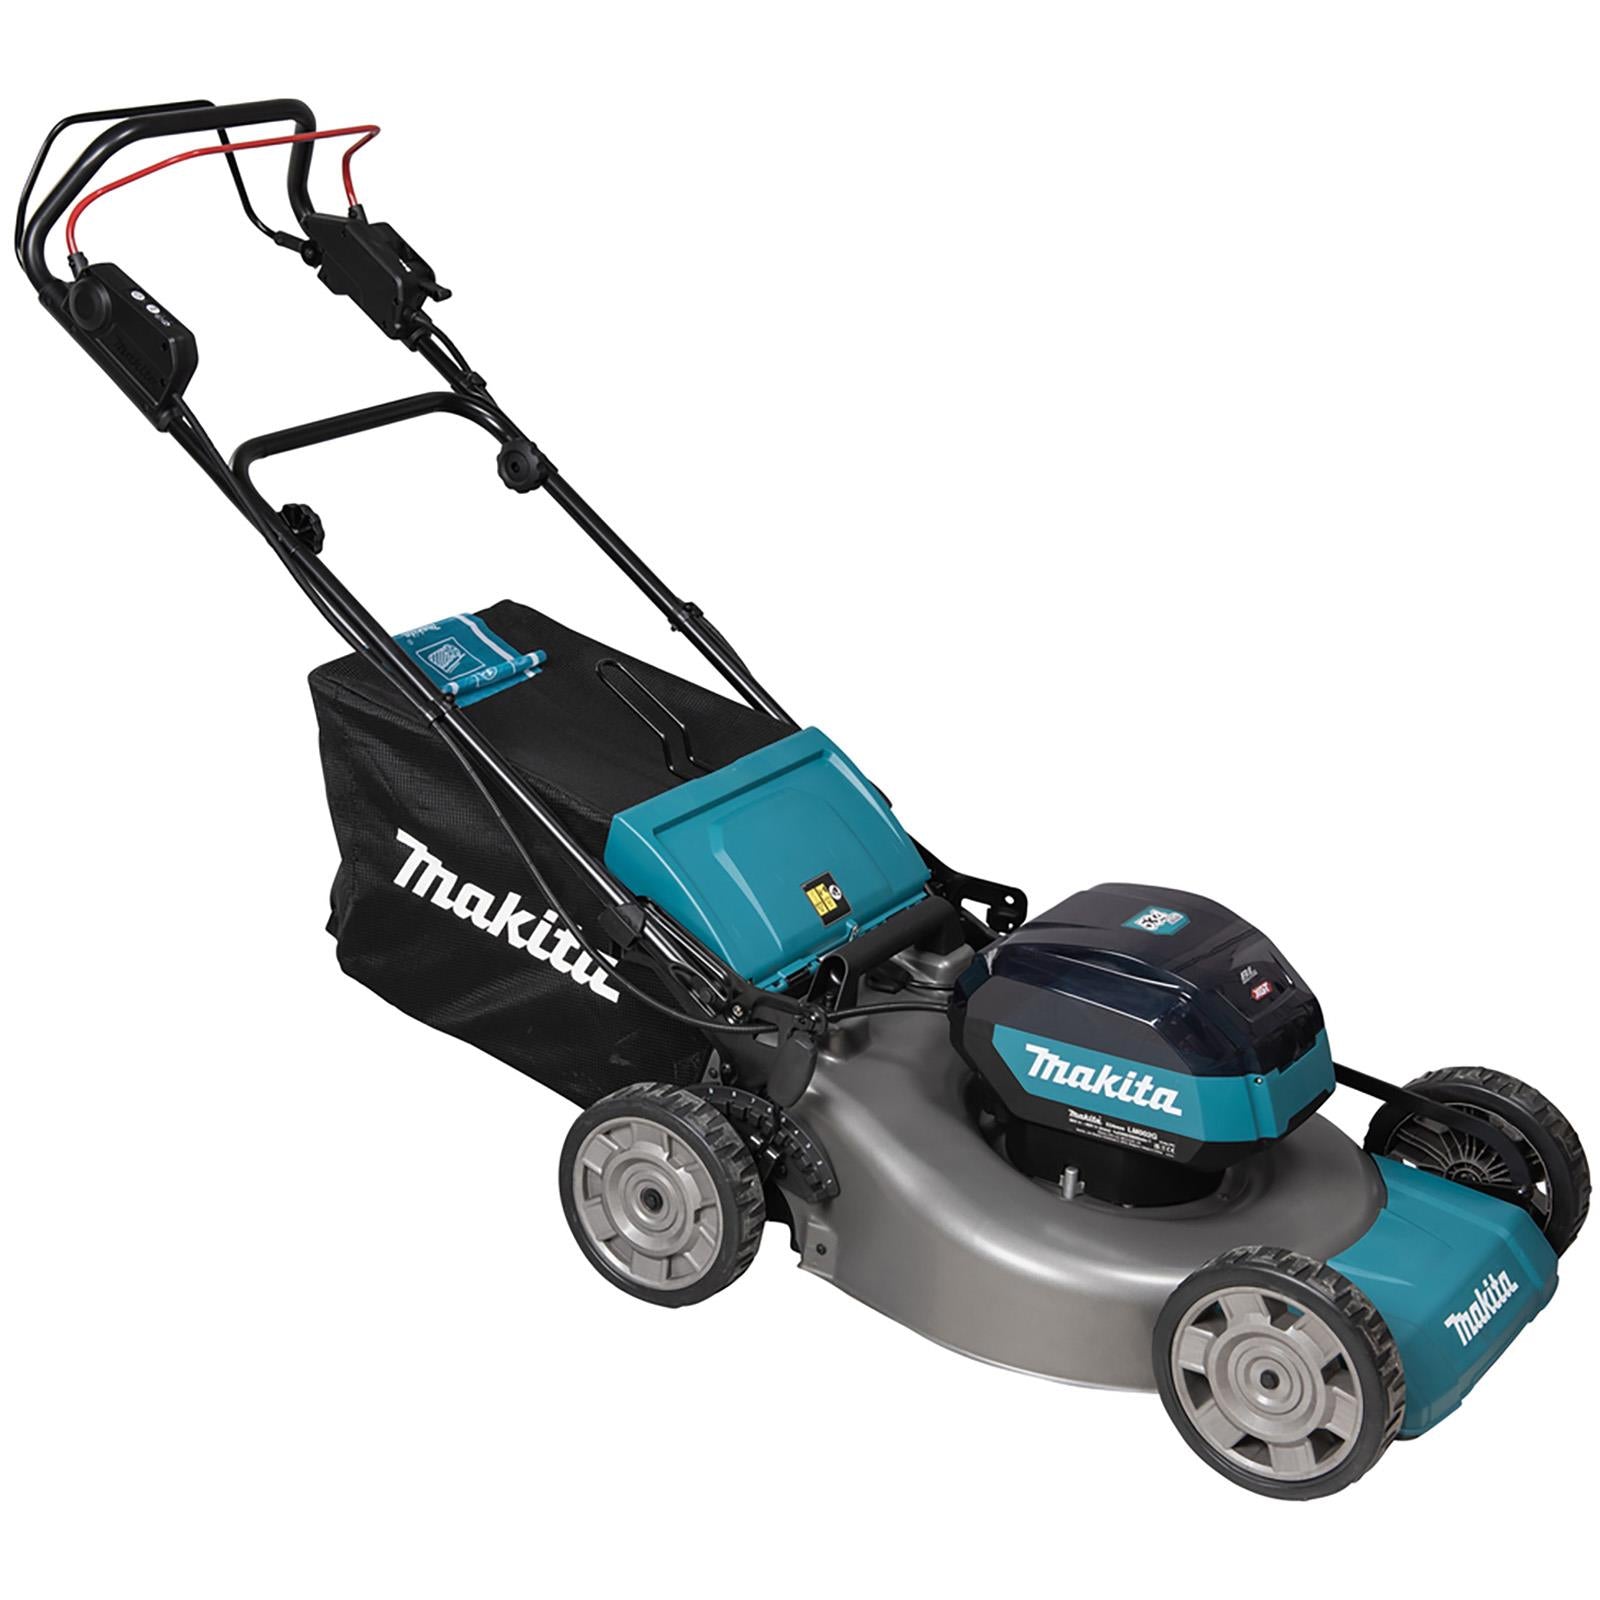 Makita 53cm Lawn Mower 40V Max XGT Li-ion Cordless Garden Grass Outdoor 2 x 5Ah Battery and Dual Fast Charger LM002GT204